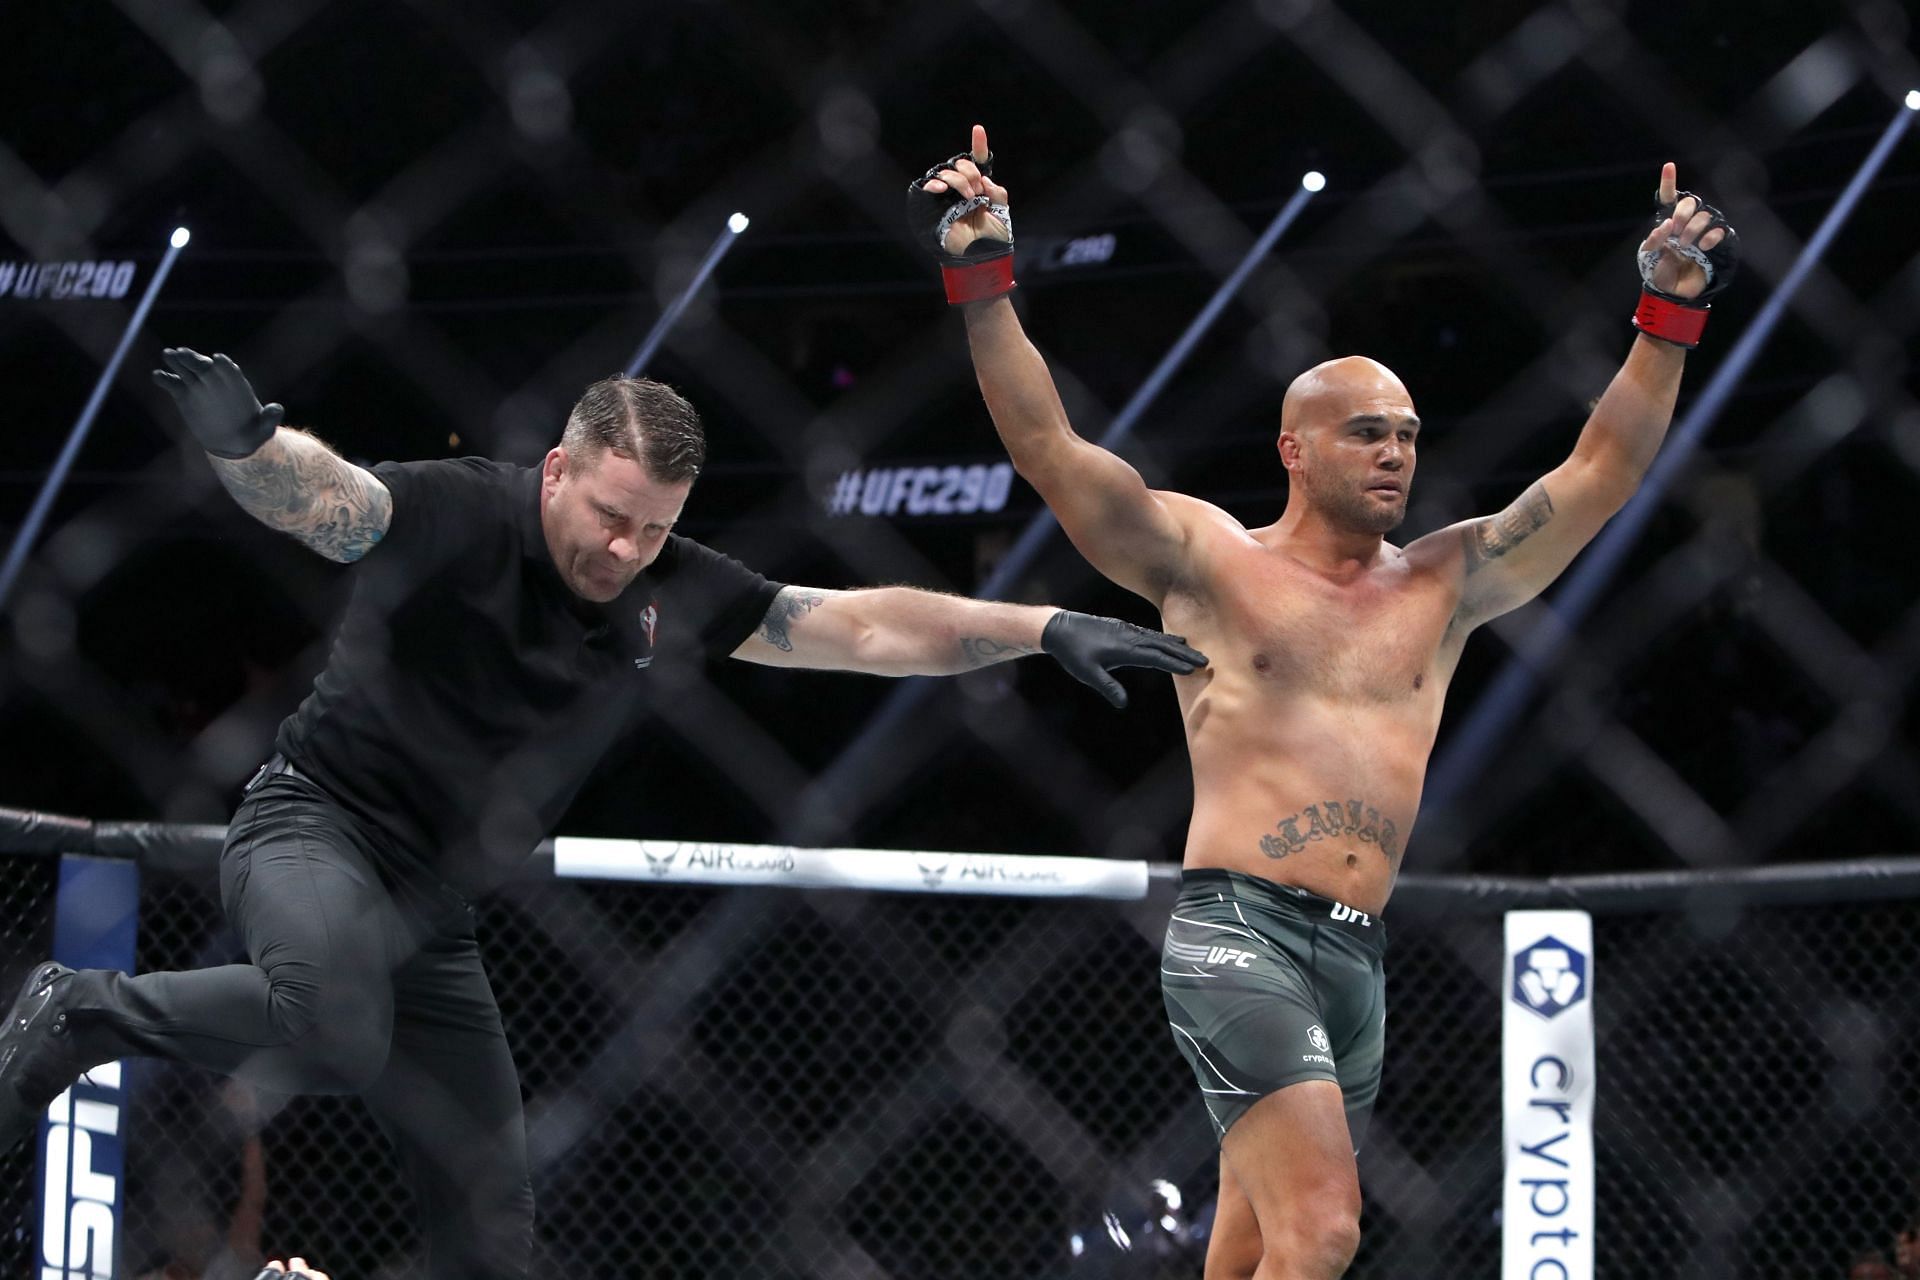 Robbie Lawler retired in style by knocking out Niko Price